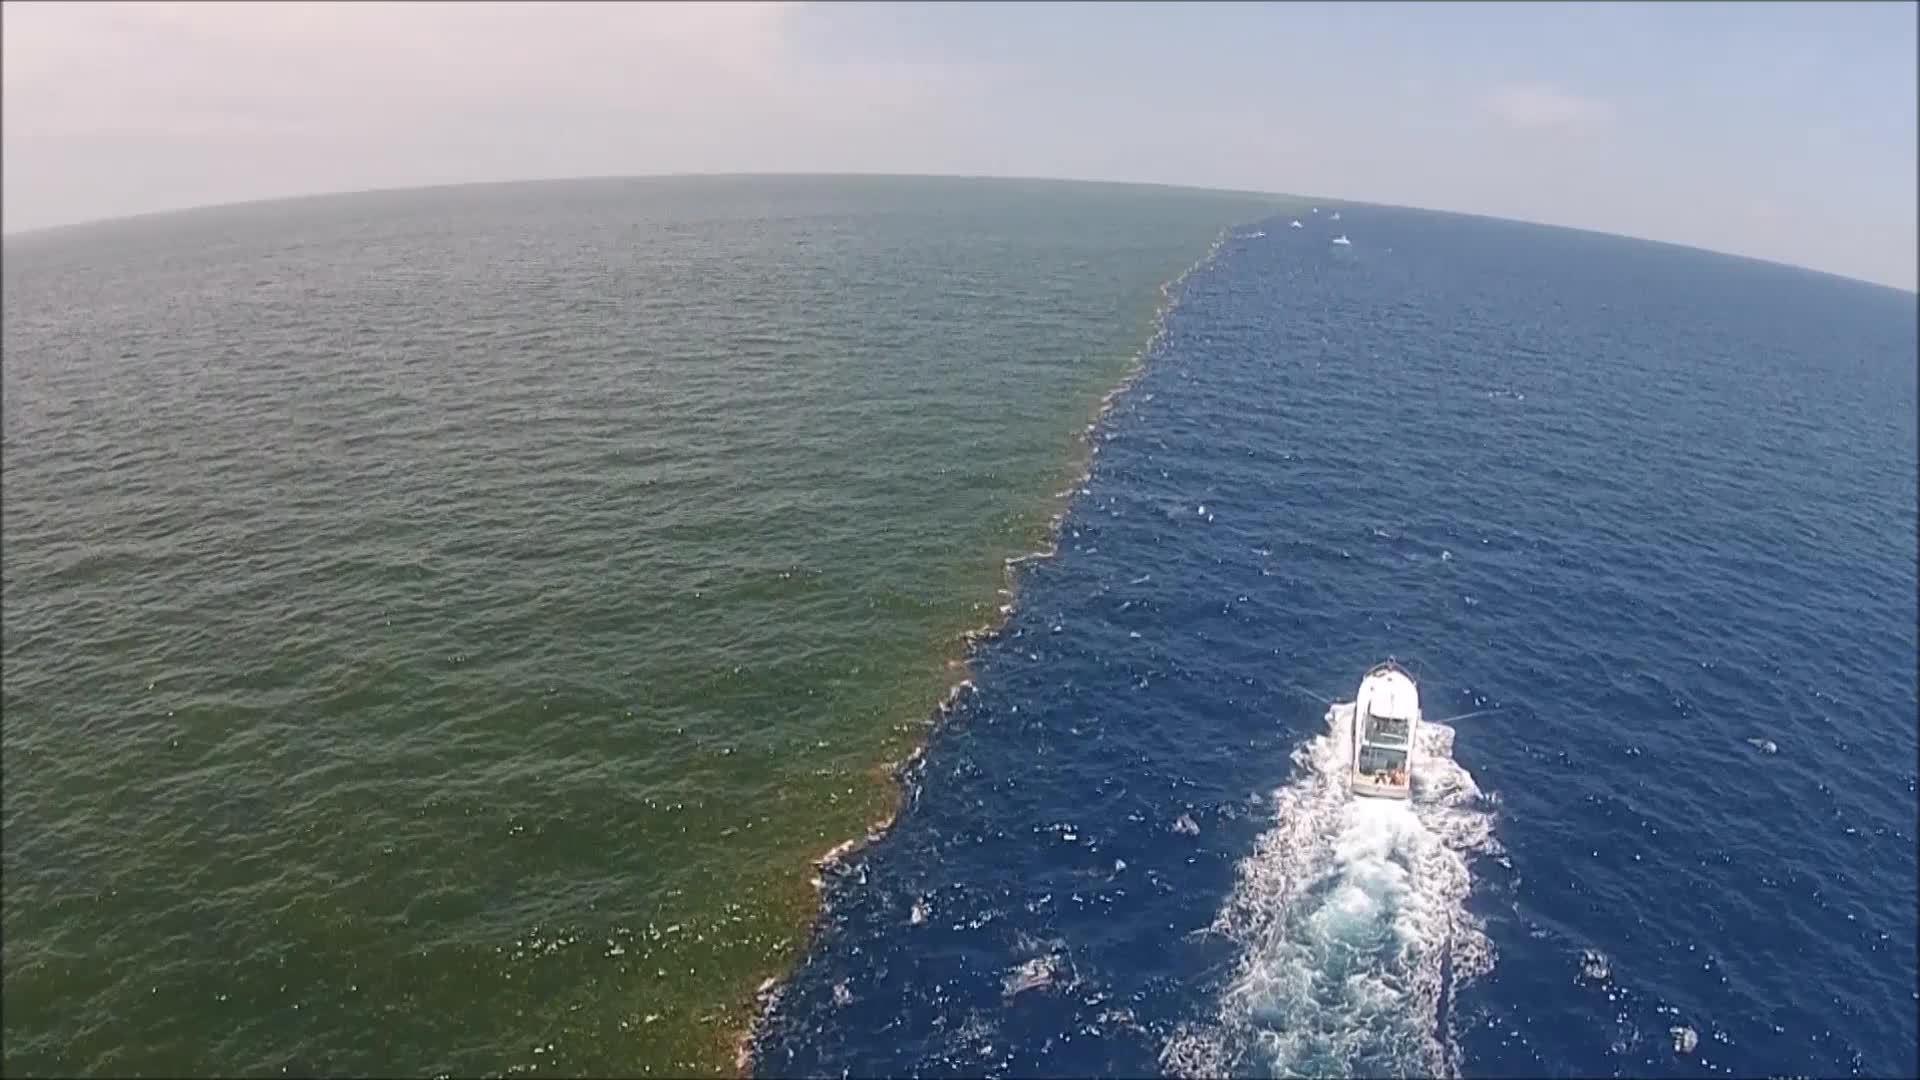 Mississippi River Meets The Gulf of Mexico: NO OXYGEN, NO LIFE: THE ...